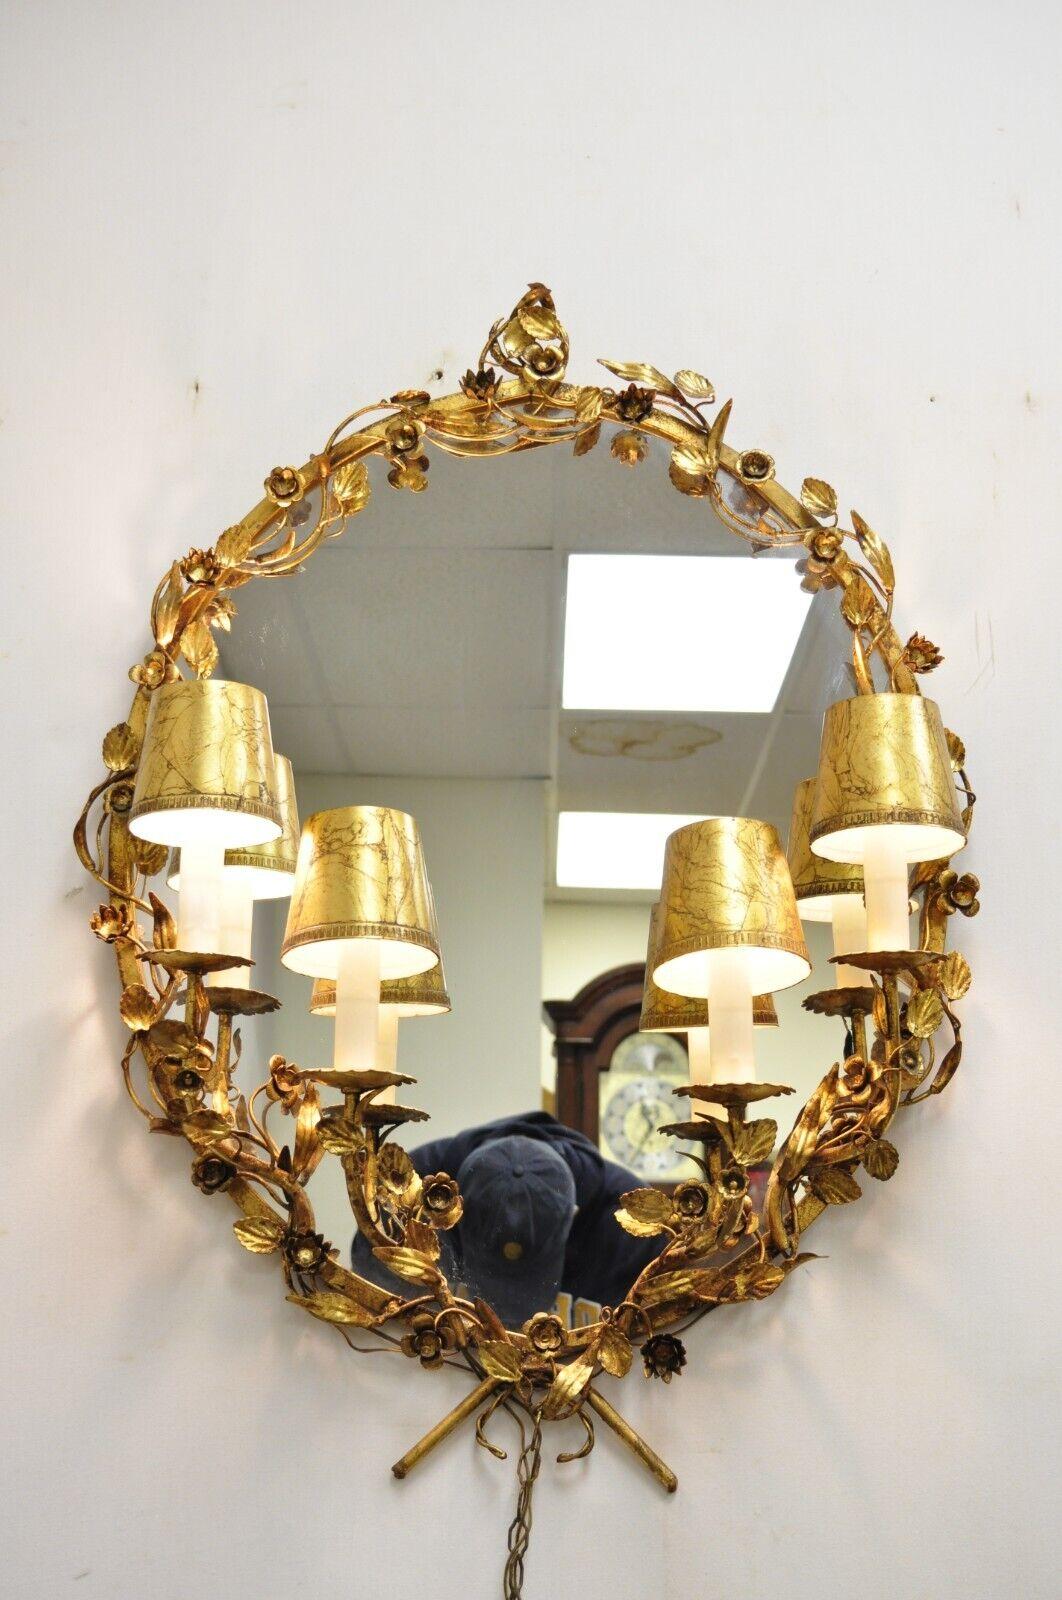 20th Century Vtg Italian Hollywood Regency Gold Gilt Iron Oval Floral Wall Mirror w/ Sconces For Sale